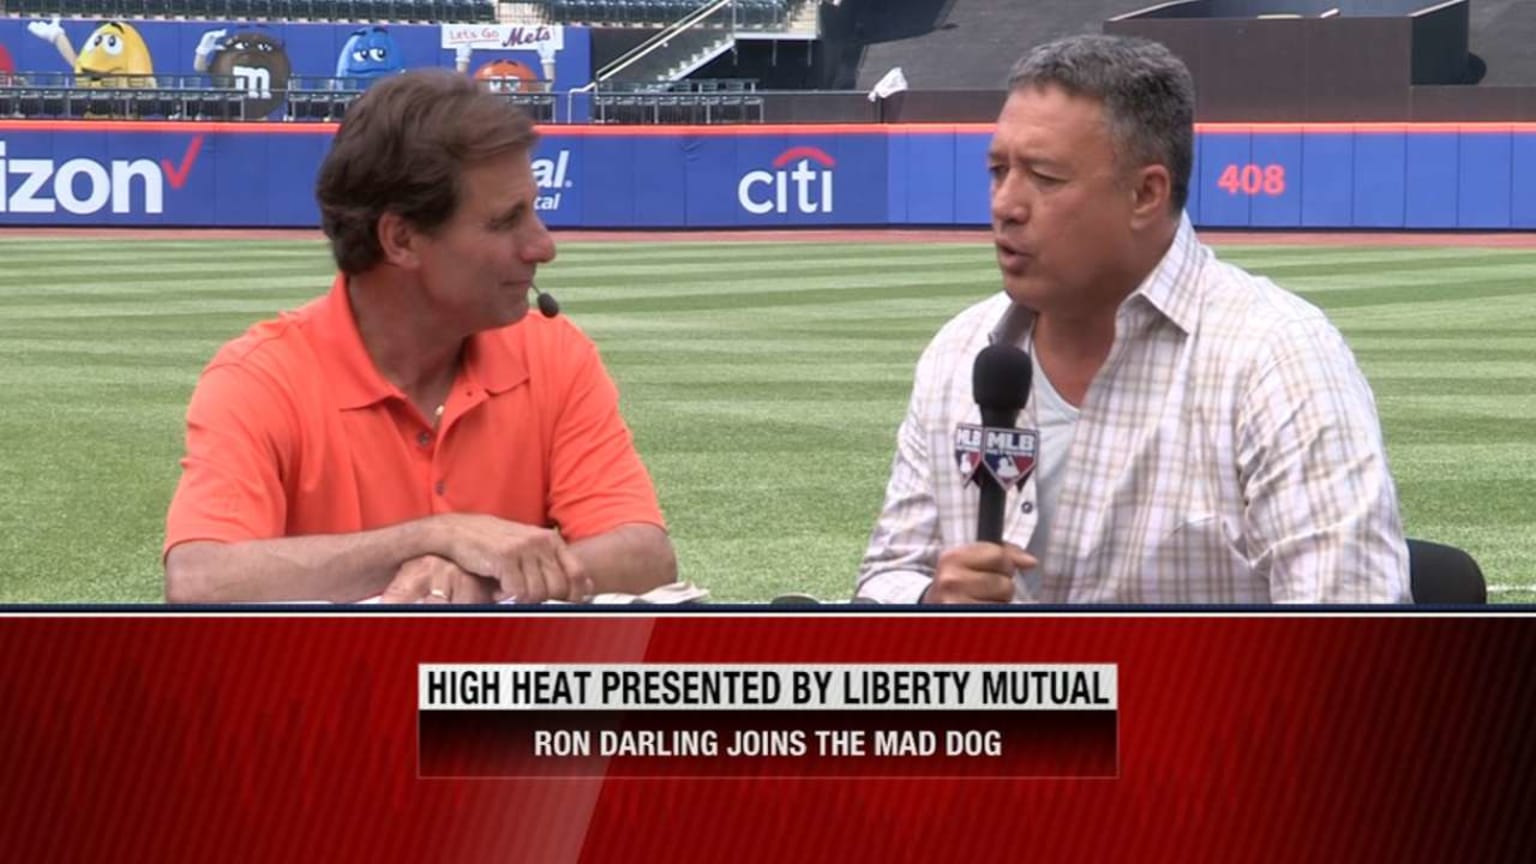 Ron Darling on the 1986 Mets, 05/27/2016